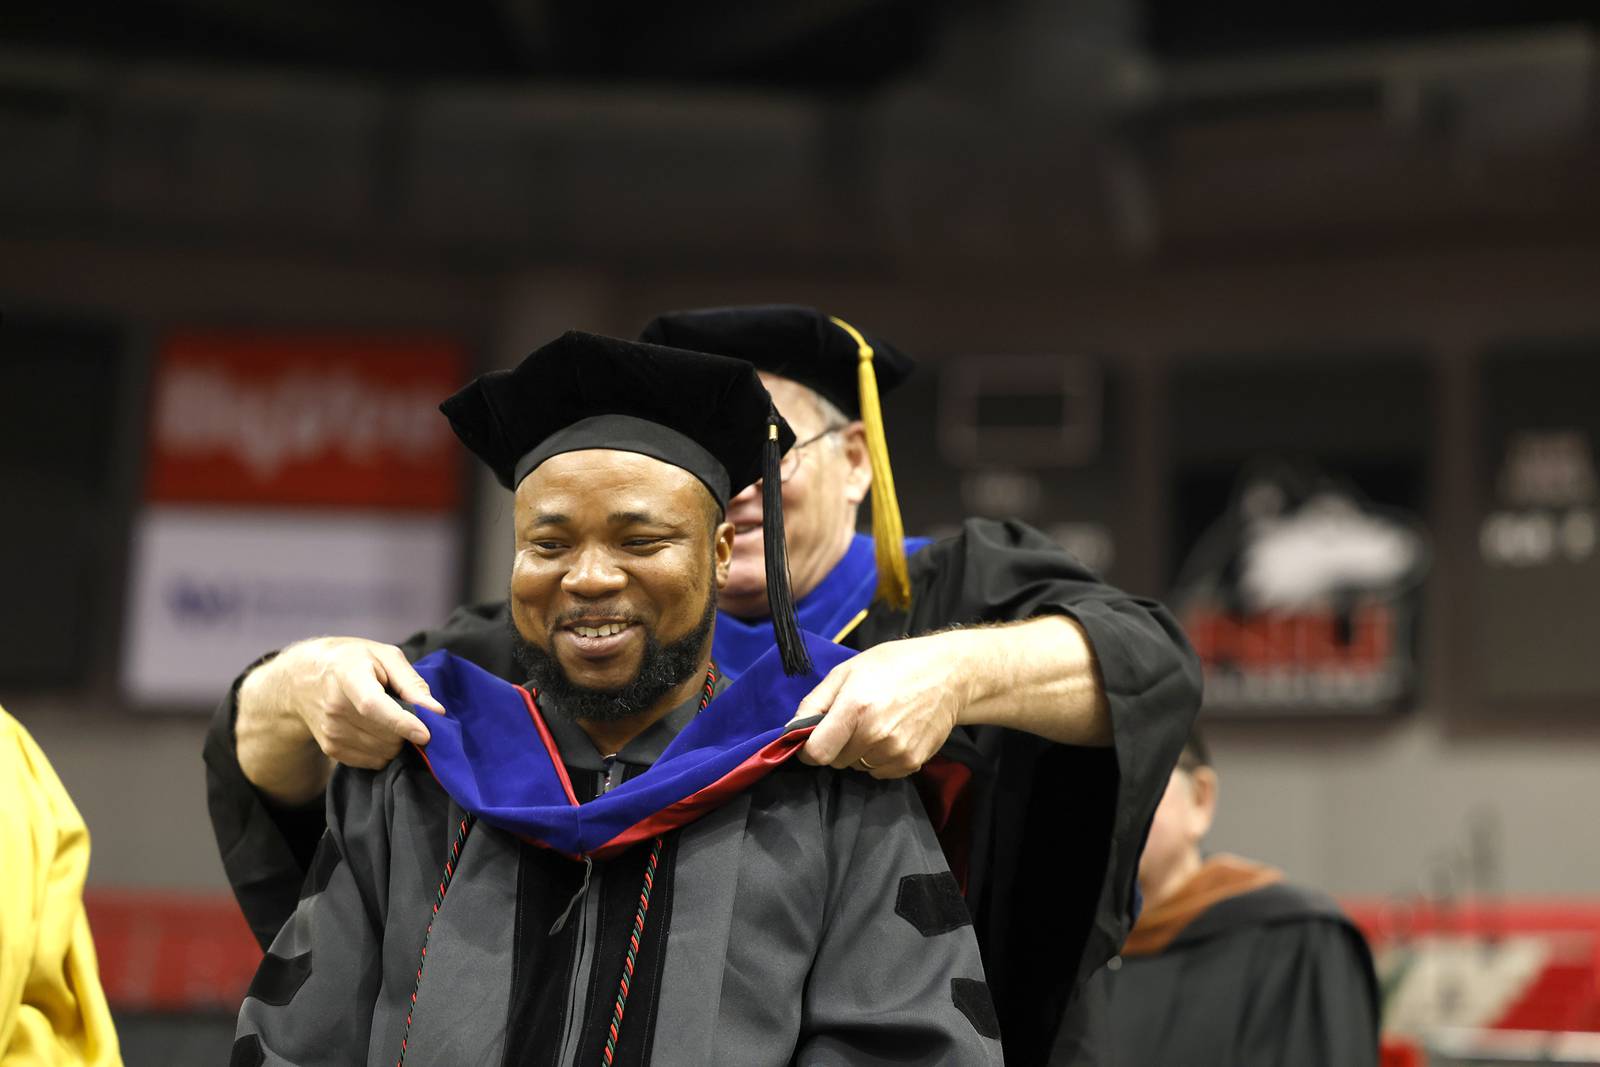 Photos 2023 Northern Illinois University Commencement Shaw Local